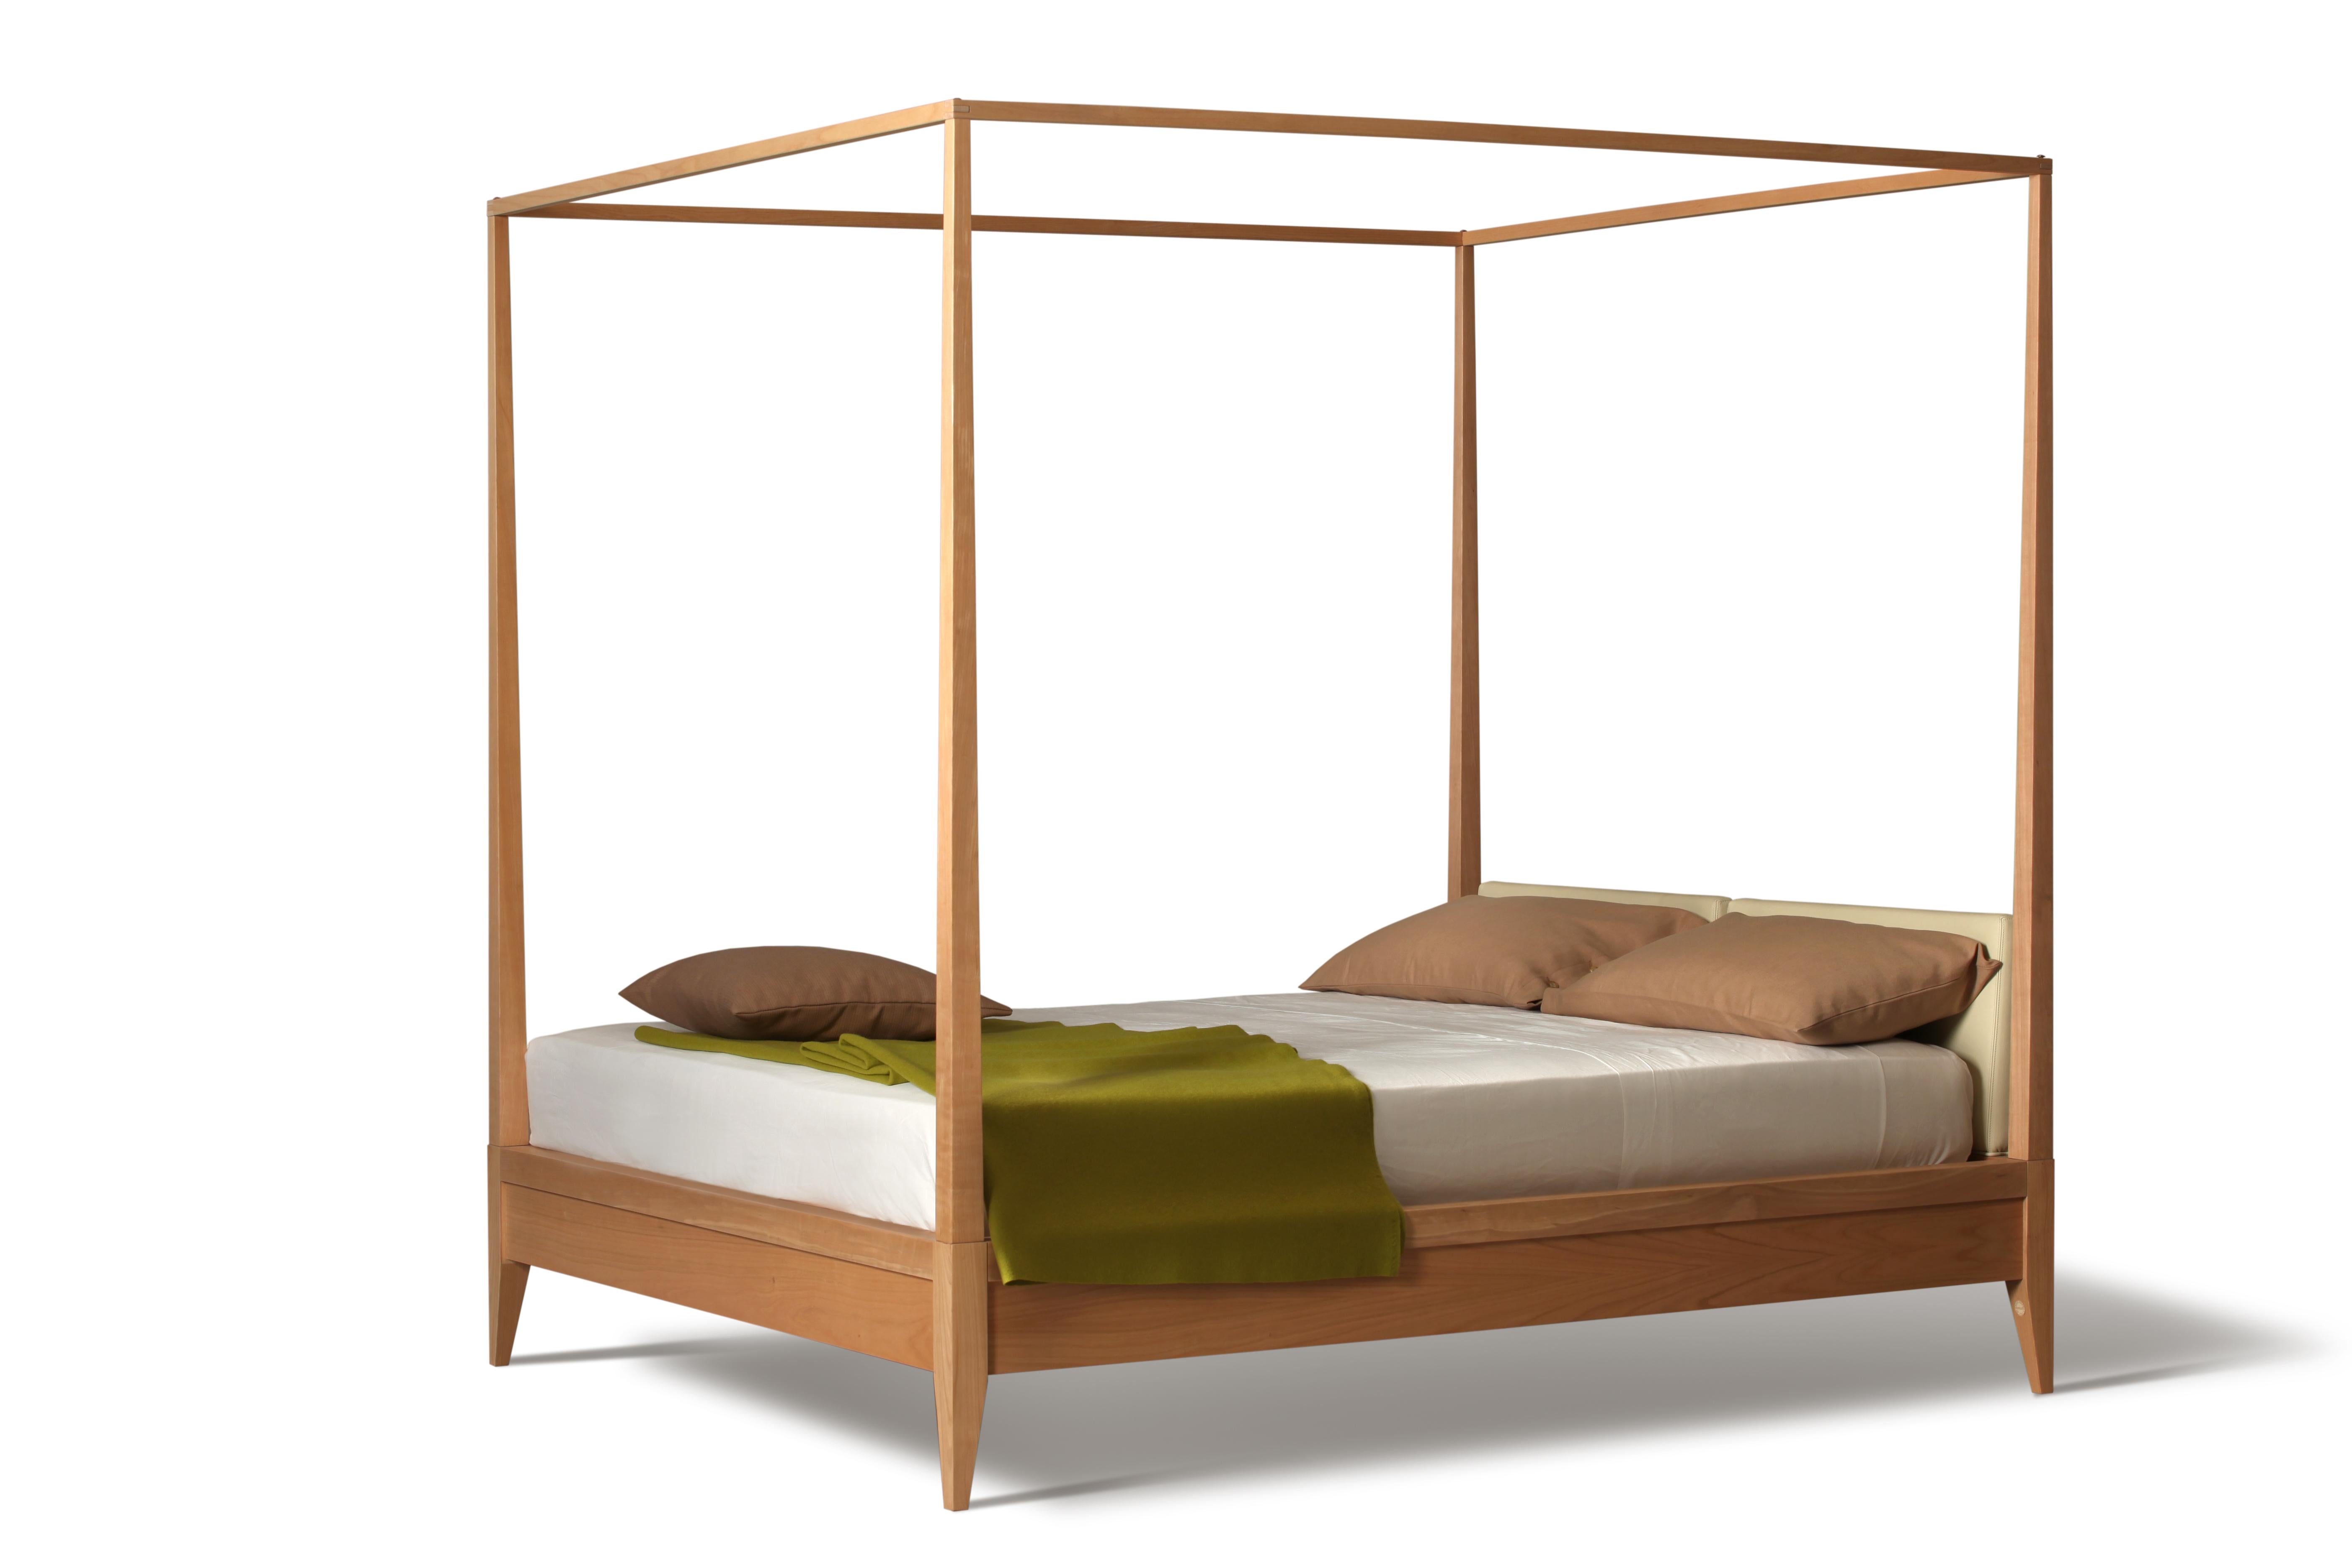 Italian Valentino Canopy Bed by Morelato, made of Cherrywood with Upholstered Headboard